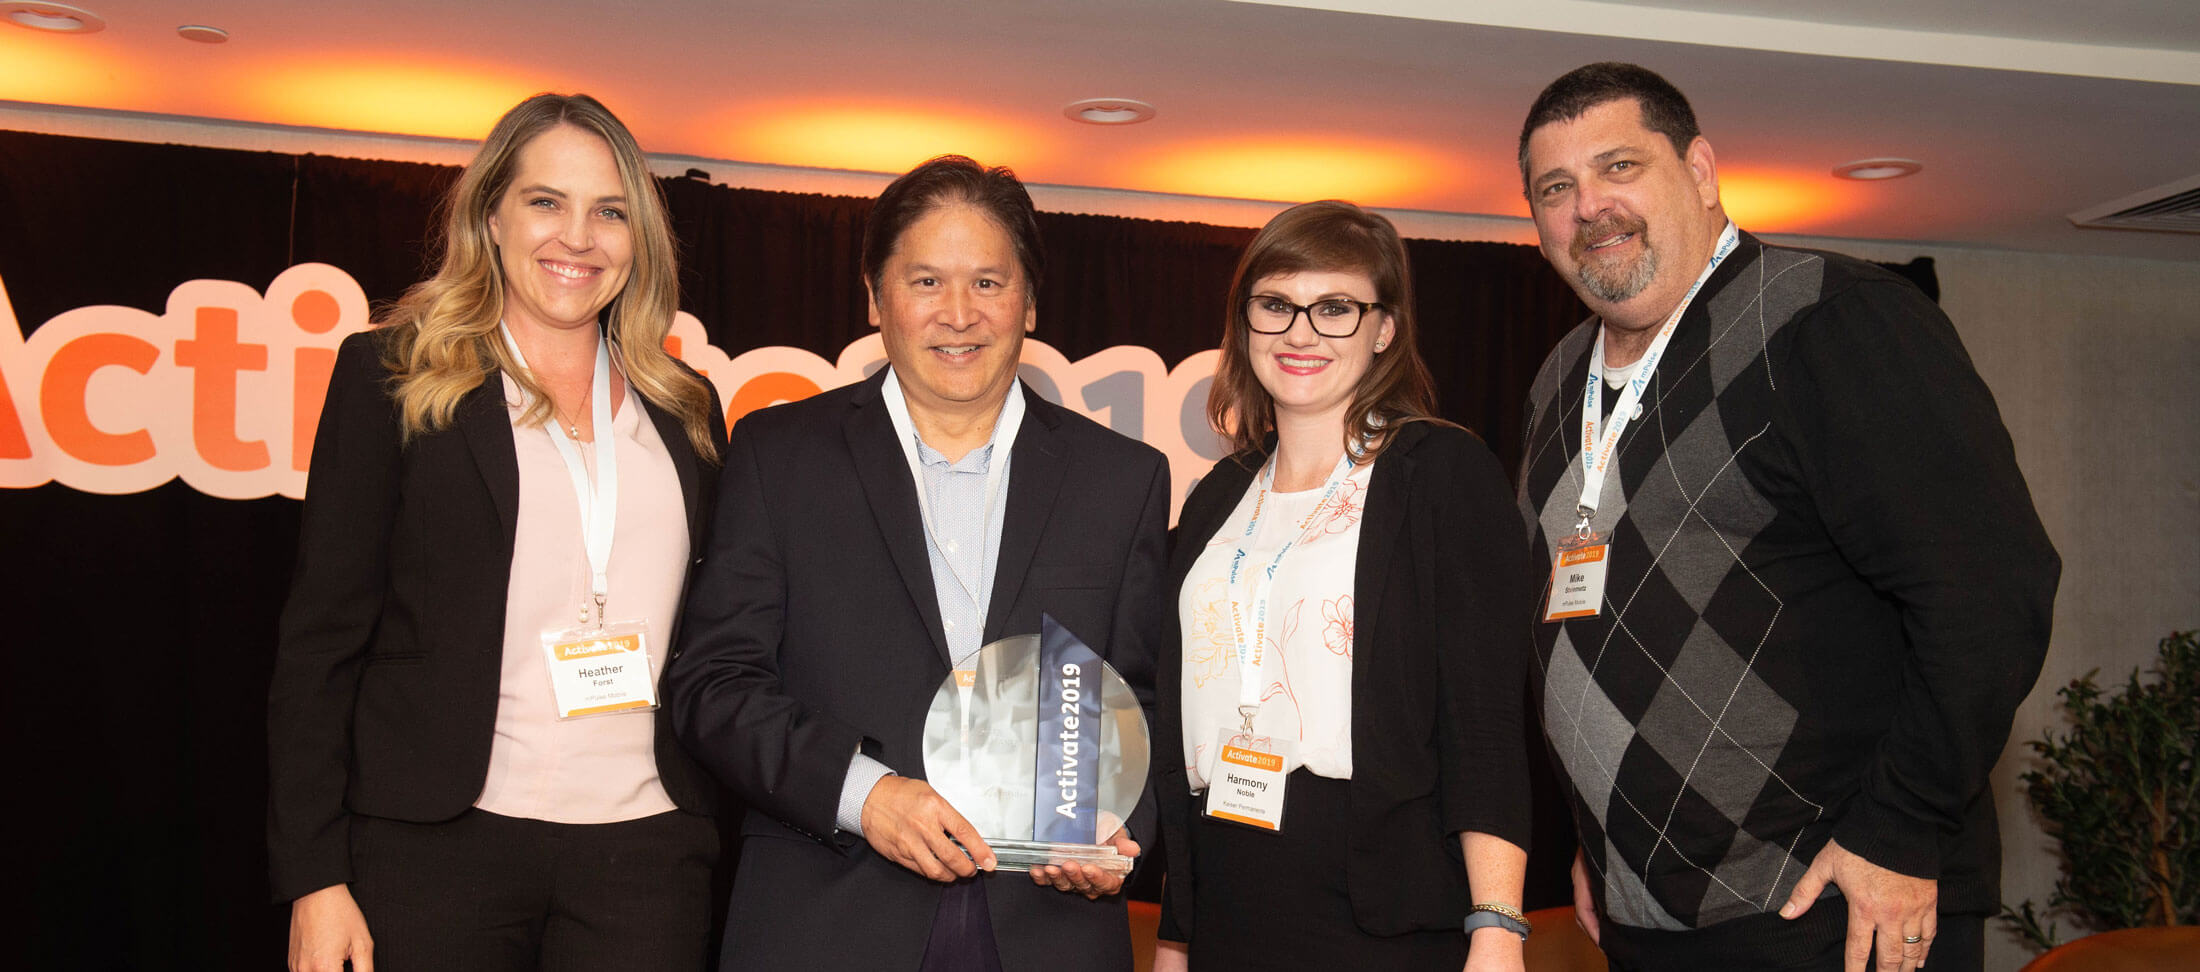 mPulse Mobile Celebrates Innovation and Health Outcomes with Second Annual Activate Awards